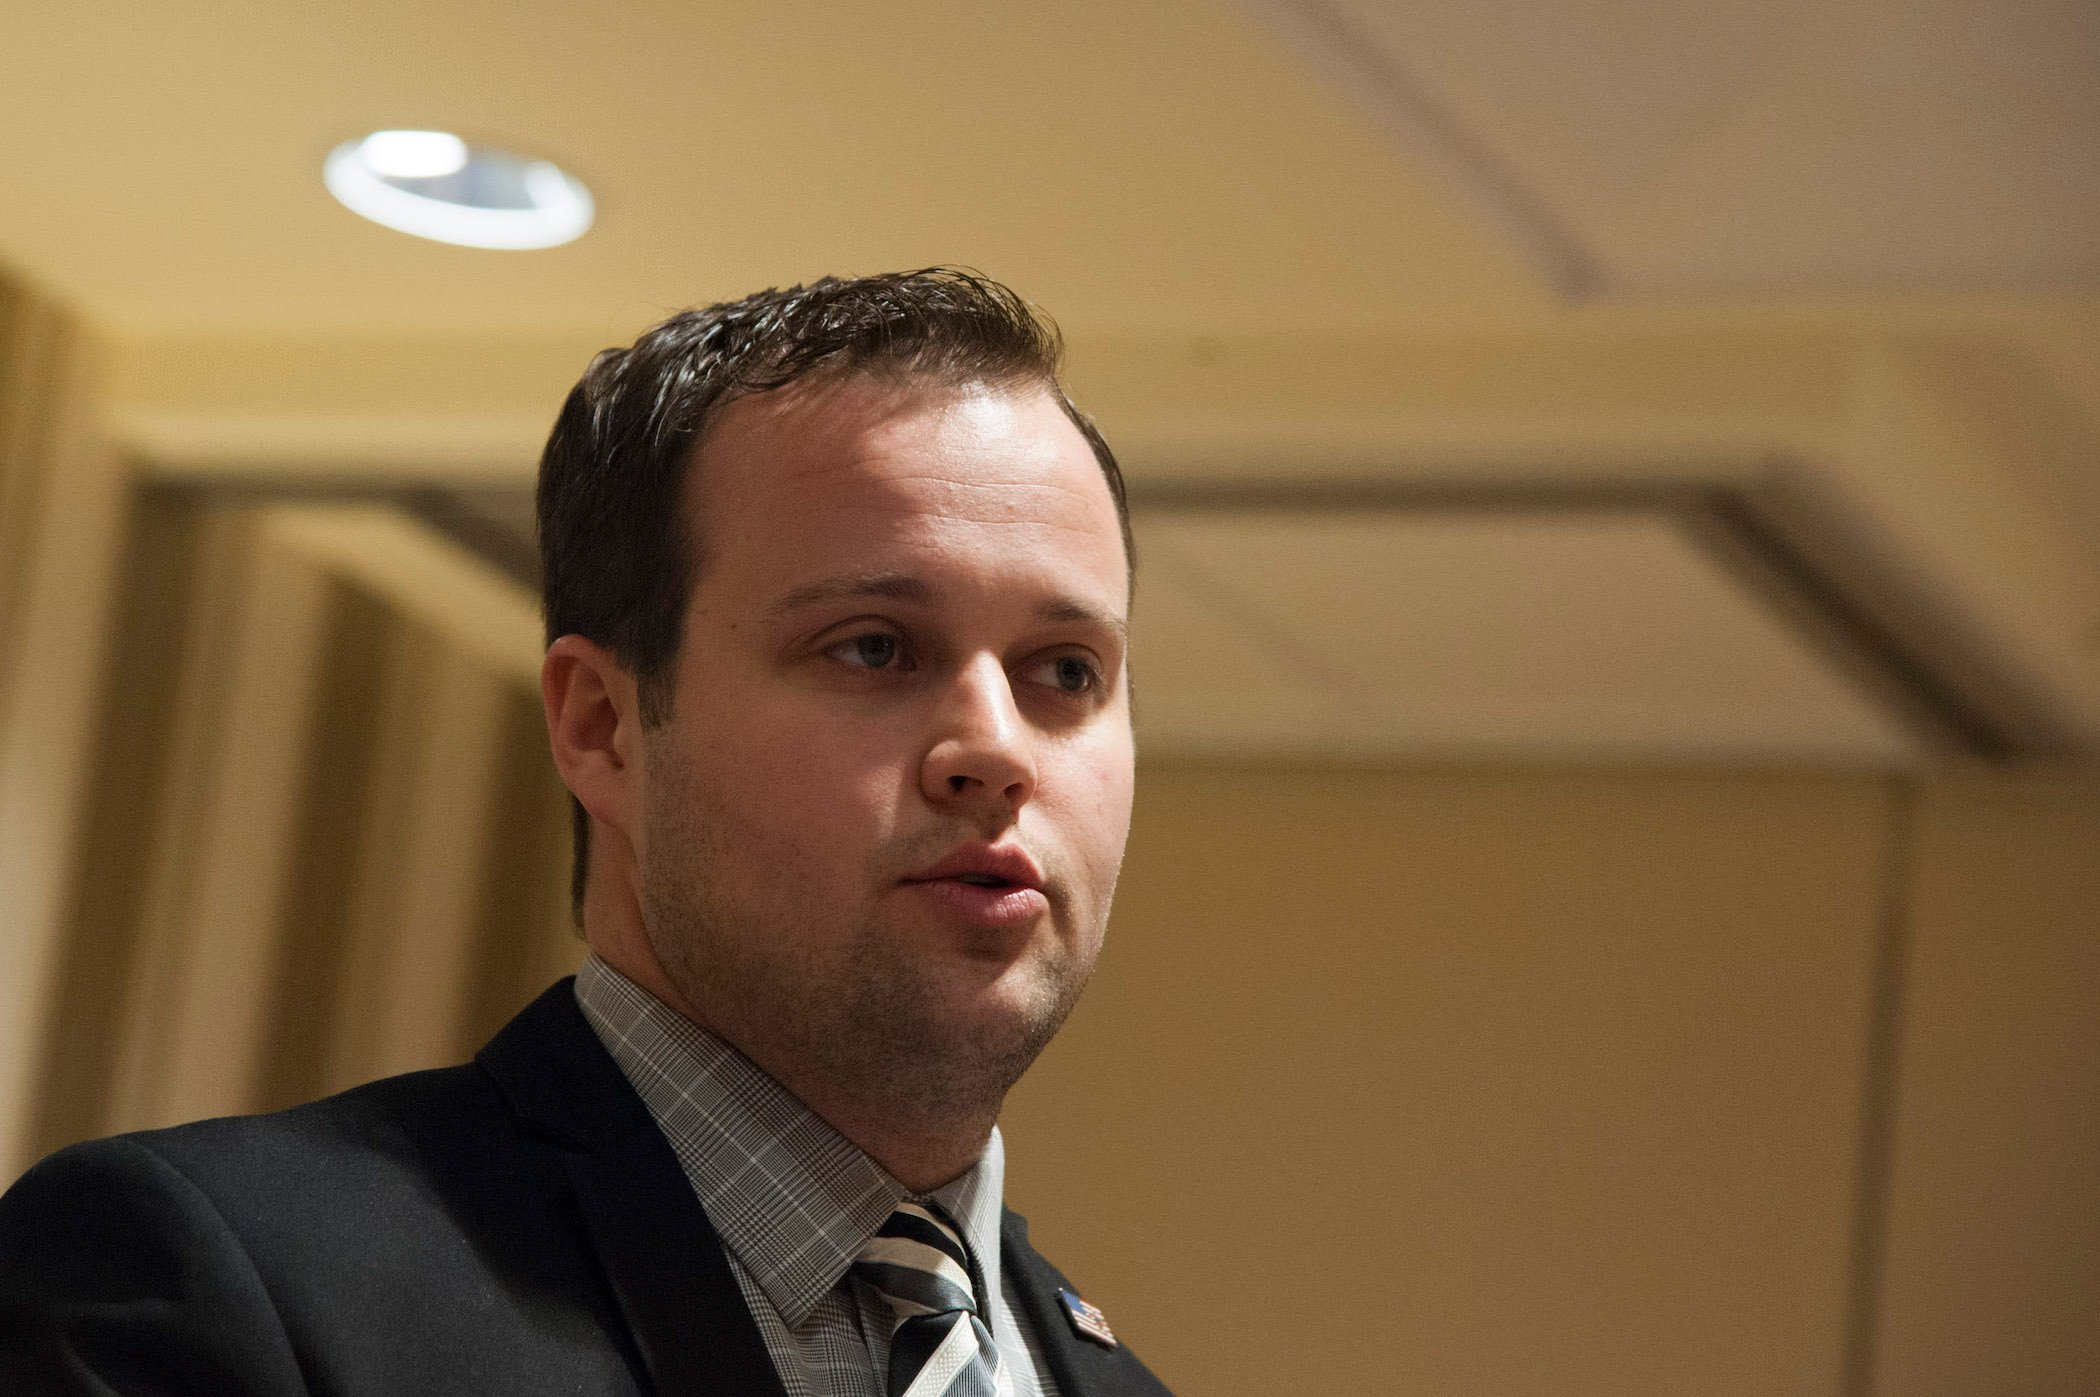 Josh Duggar of the Duggar family in a suit at CPAC